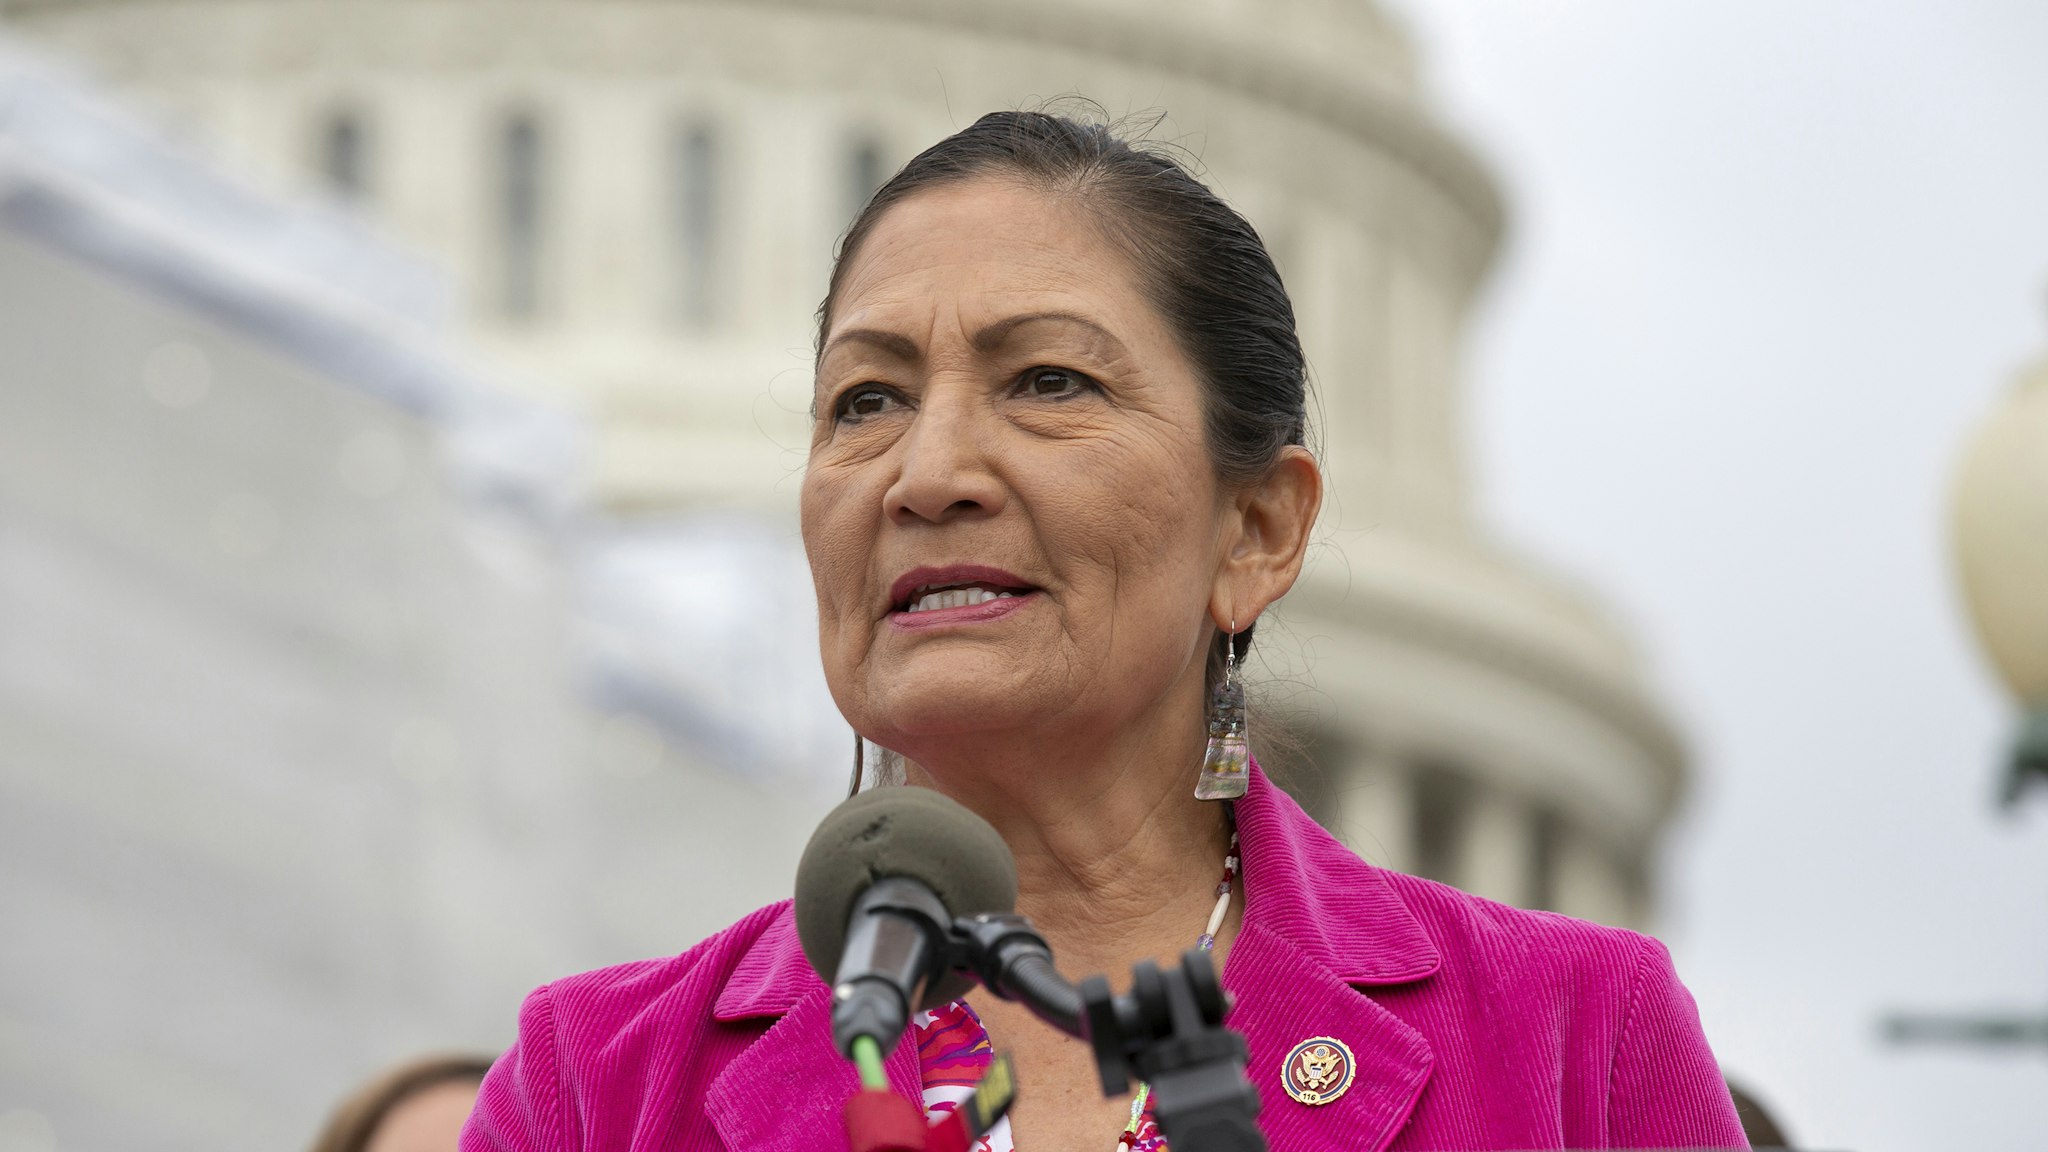 WASHINGTON, DC - JUNE 19: U.S. Rep. Deb Haaland (D-NM) speaks at a press conference on the No Shame at School Act on June 19, 2019 in Washington, DC. The bill, which is sponsored by U.S. Rep. Ilhan Omar (D-MN), will ensure that no child is shamed or goes without eating a school lunch due to a lack of money